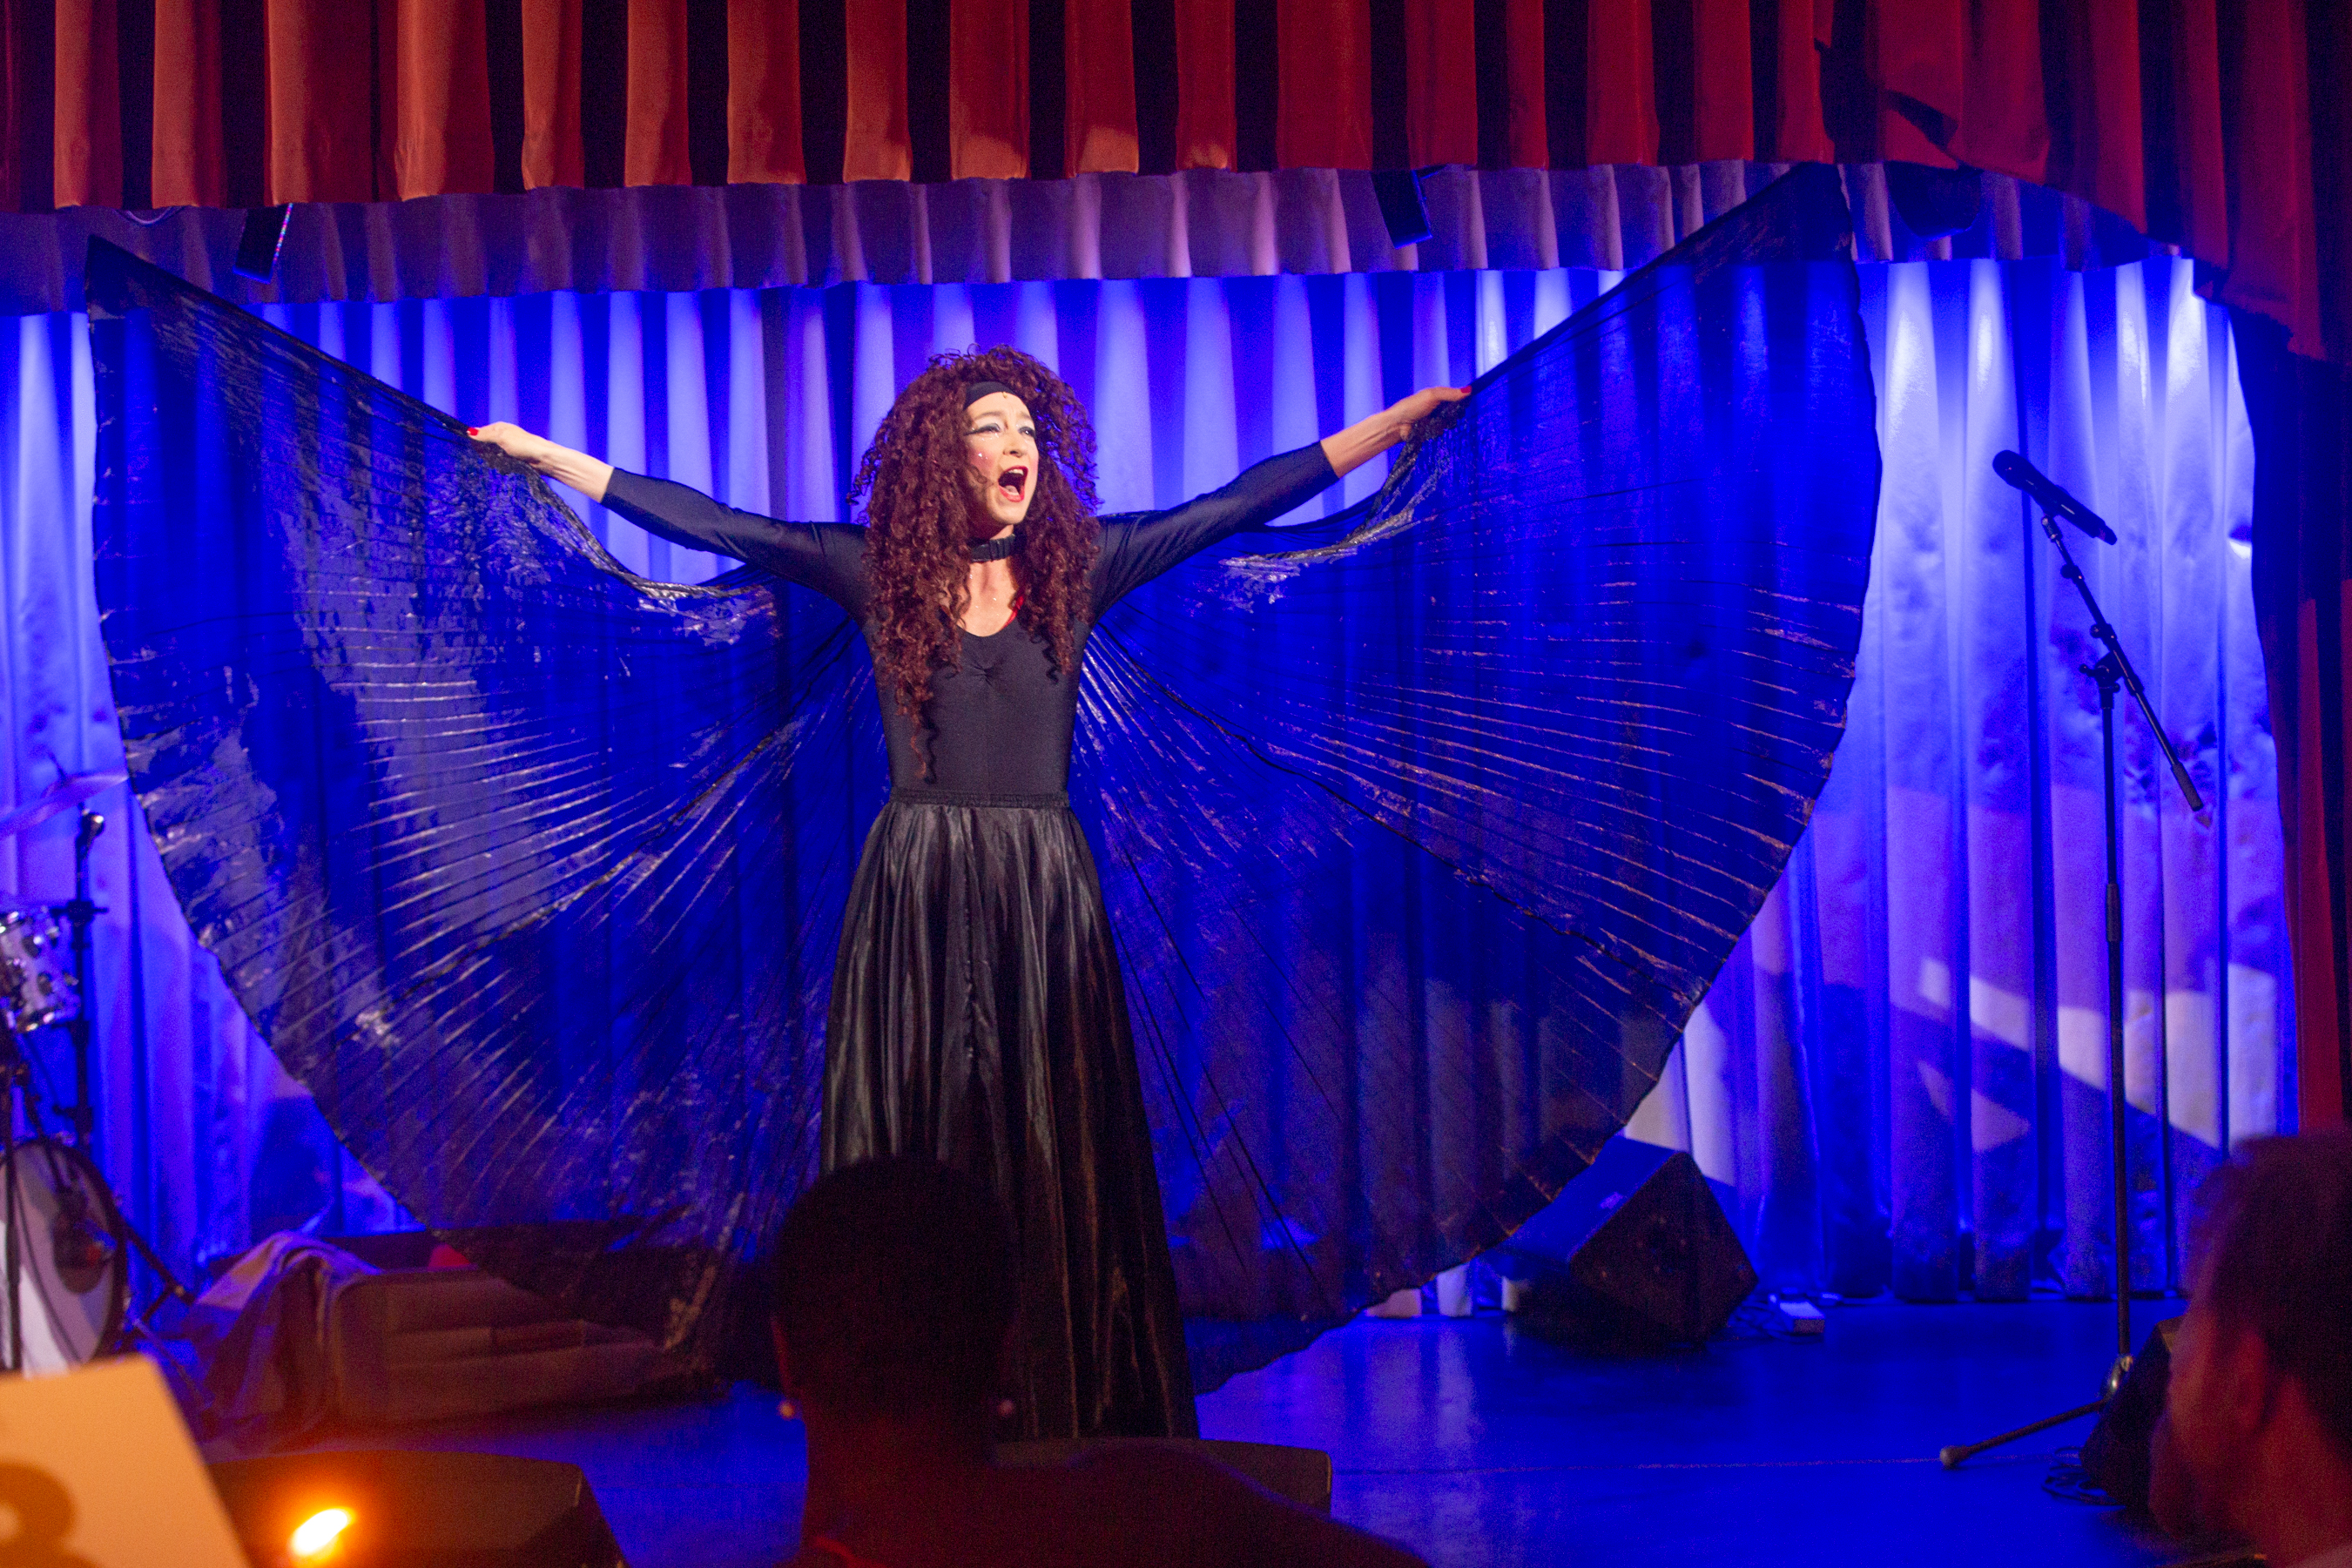 Cabaret performer with butterfly wings on stage